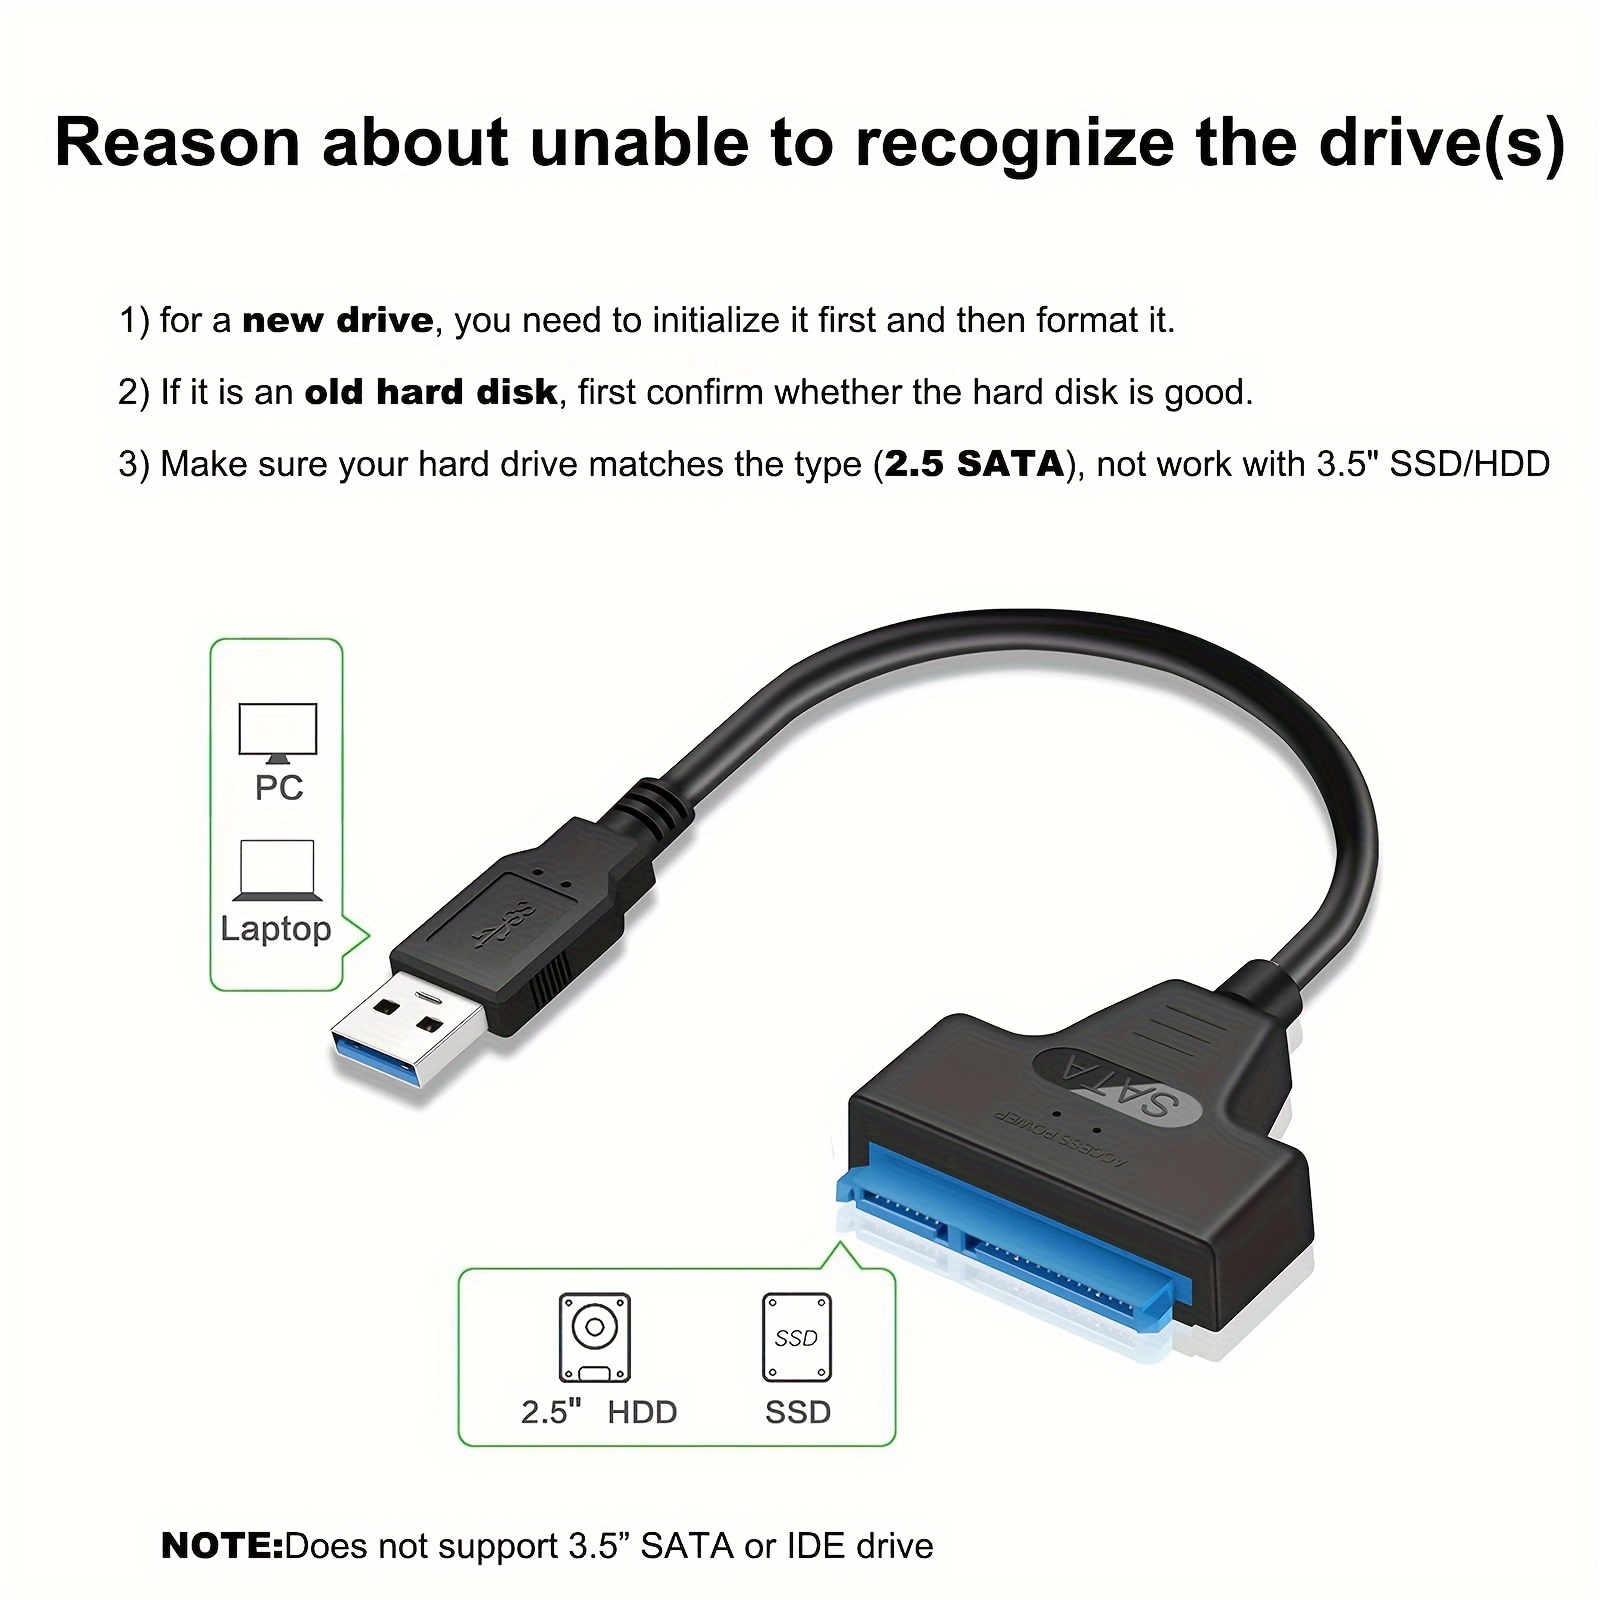 USB SATA 3 Cable Sata To USB 3.0 Adapter UP To 6 Gbps Support 2.5Inch  External SSD HDD Hard Drive 22 Pin Sata III A25 2.0 - AliExpress